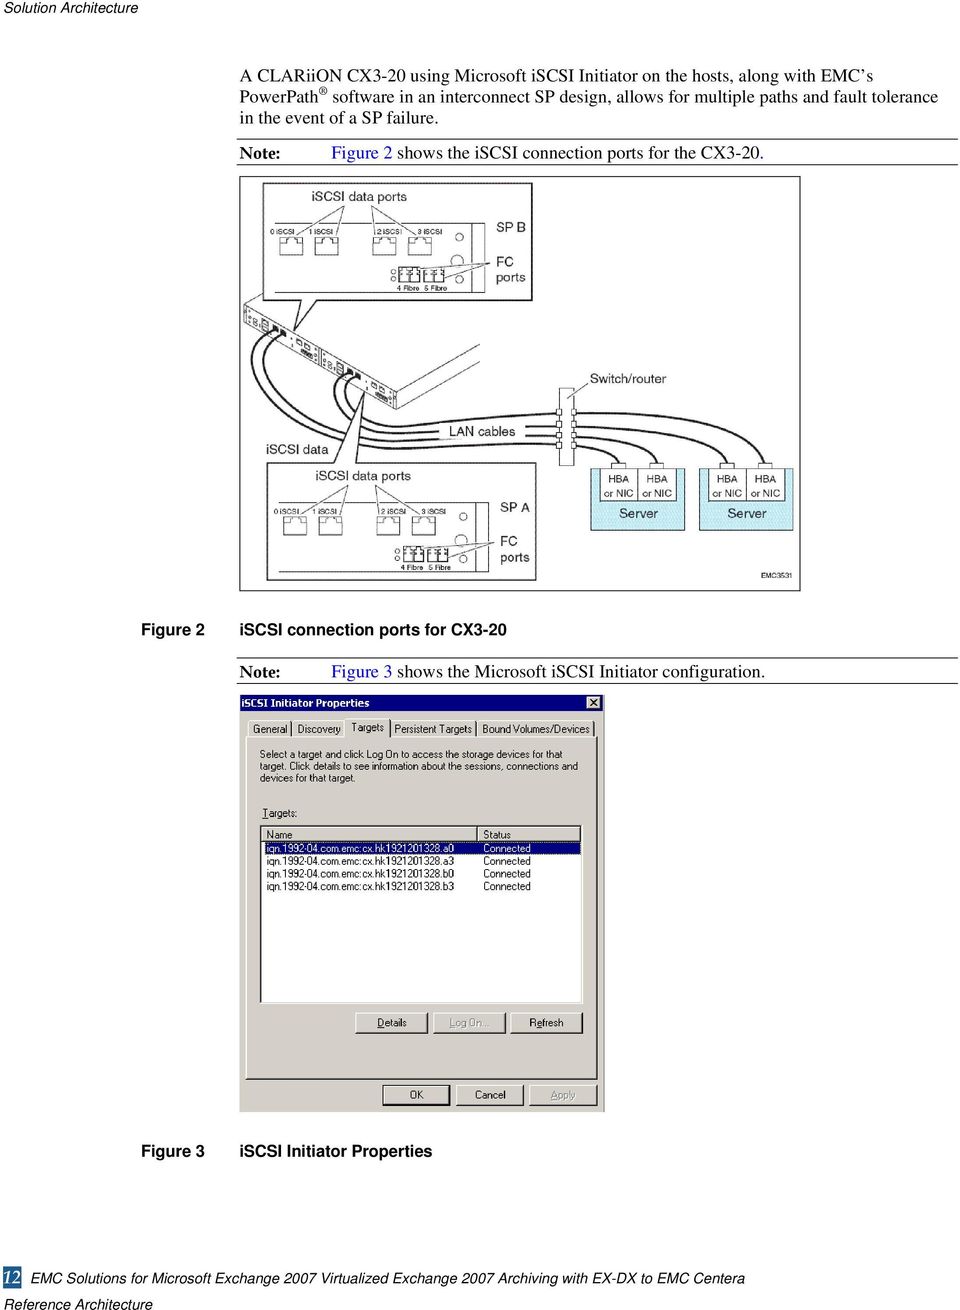 Note: Figure 2 shows the iscsi connection ports for the CX3-20.